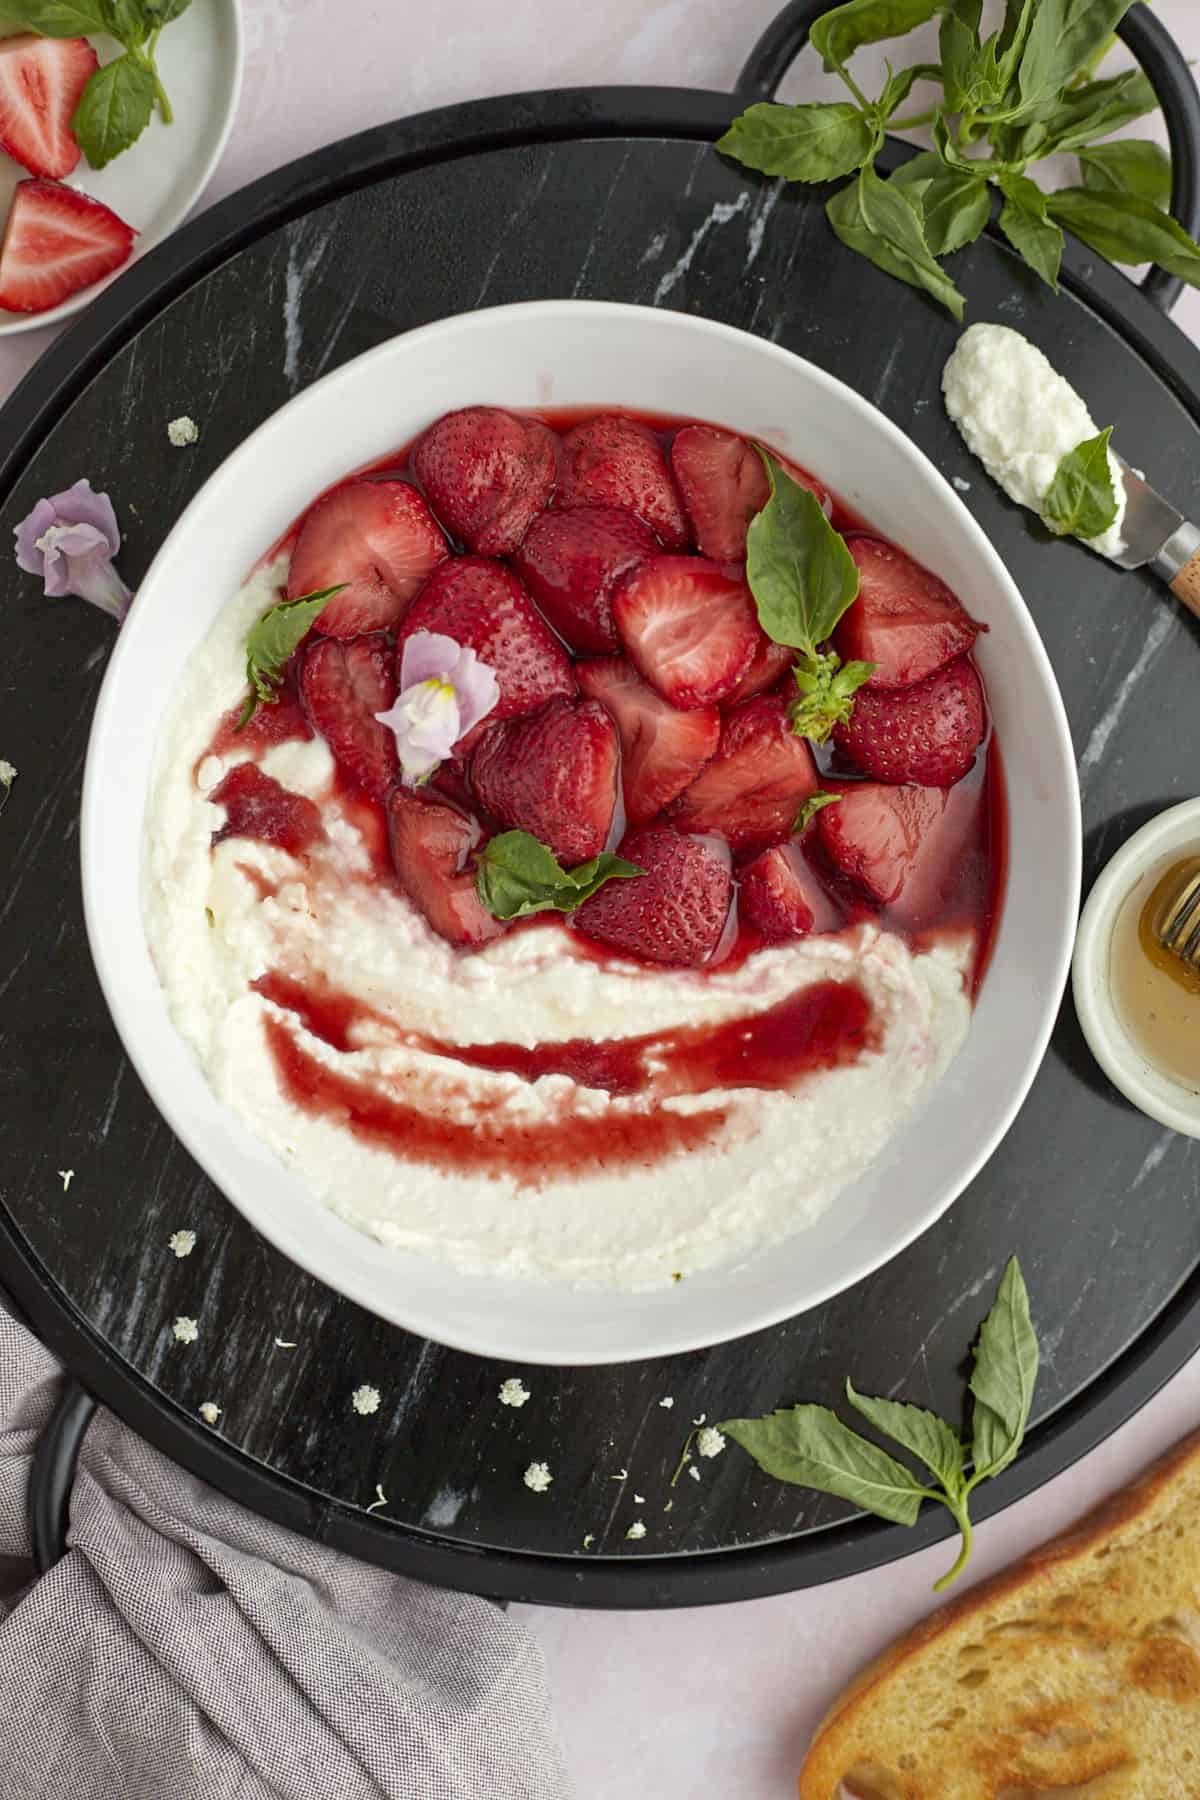 Whipped Goat Cheese with Strawberries